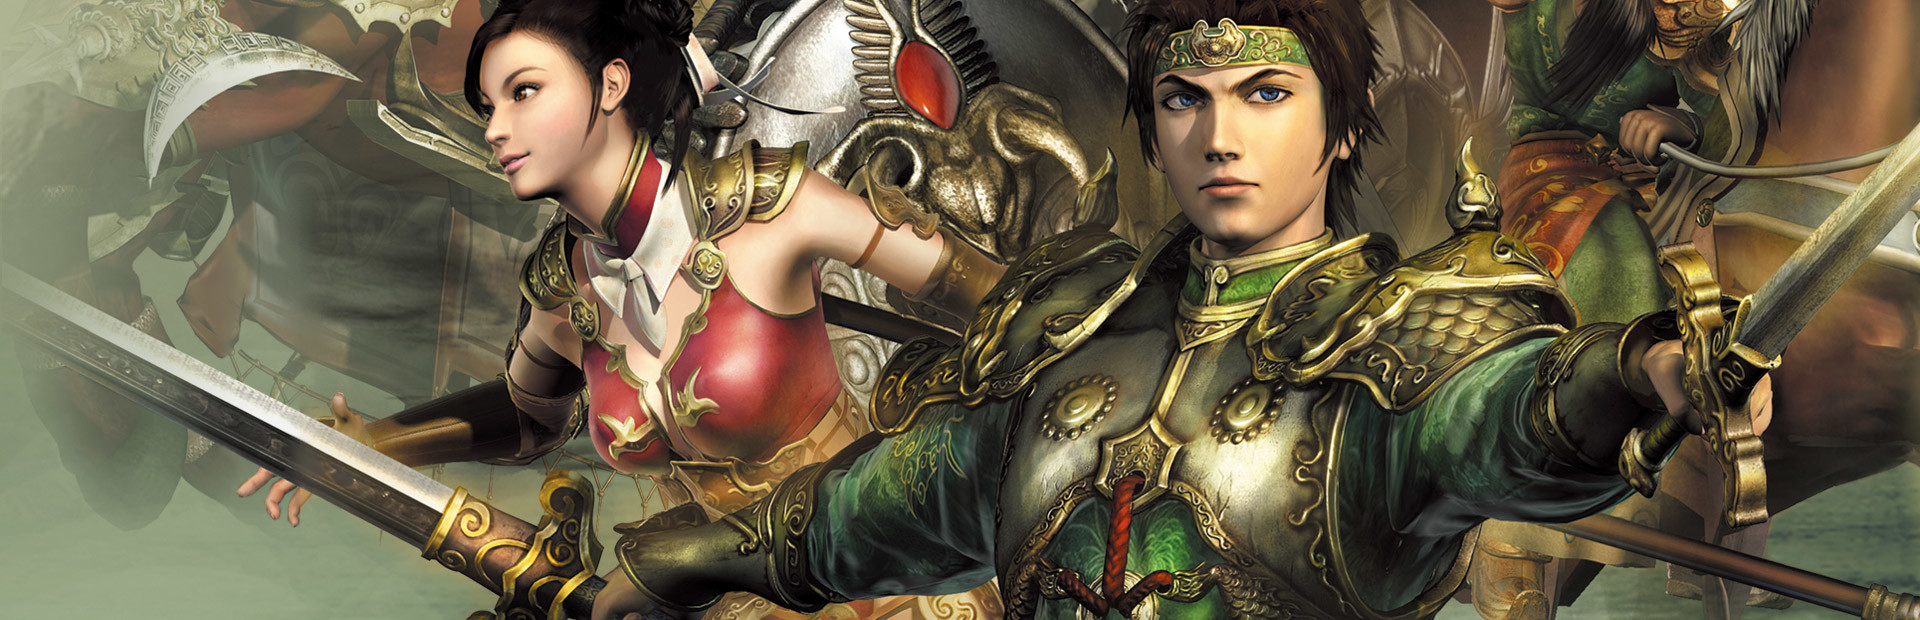 Heroes of the Three Kingdoms 7 cover image